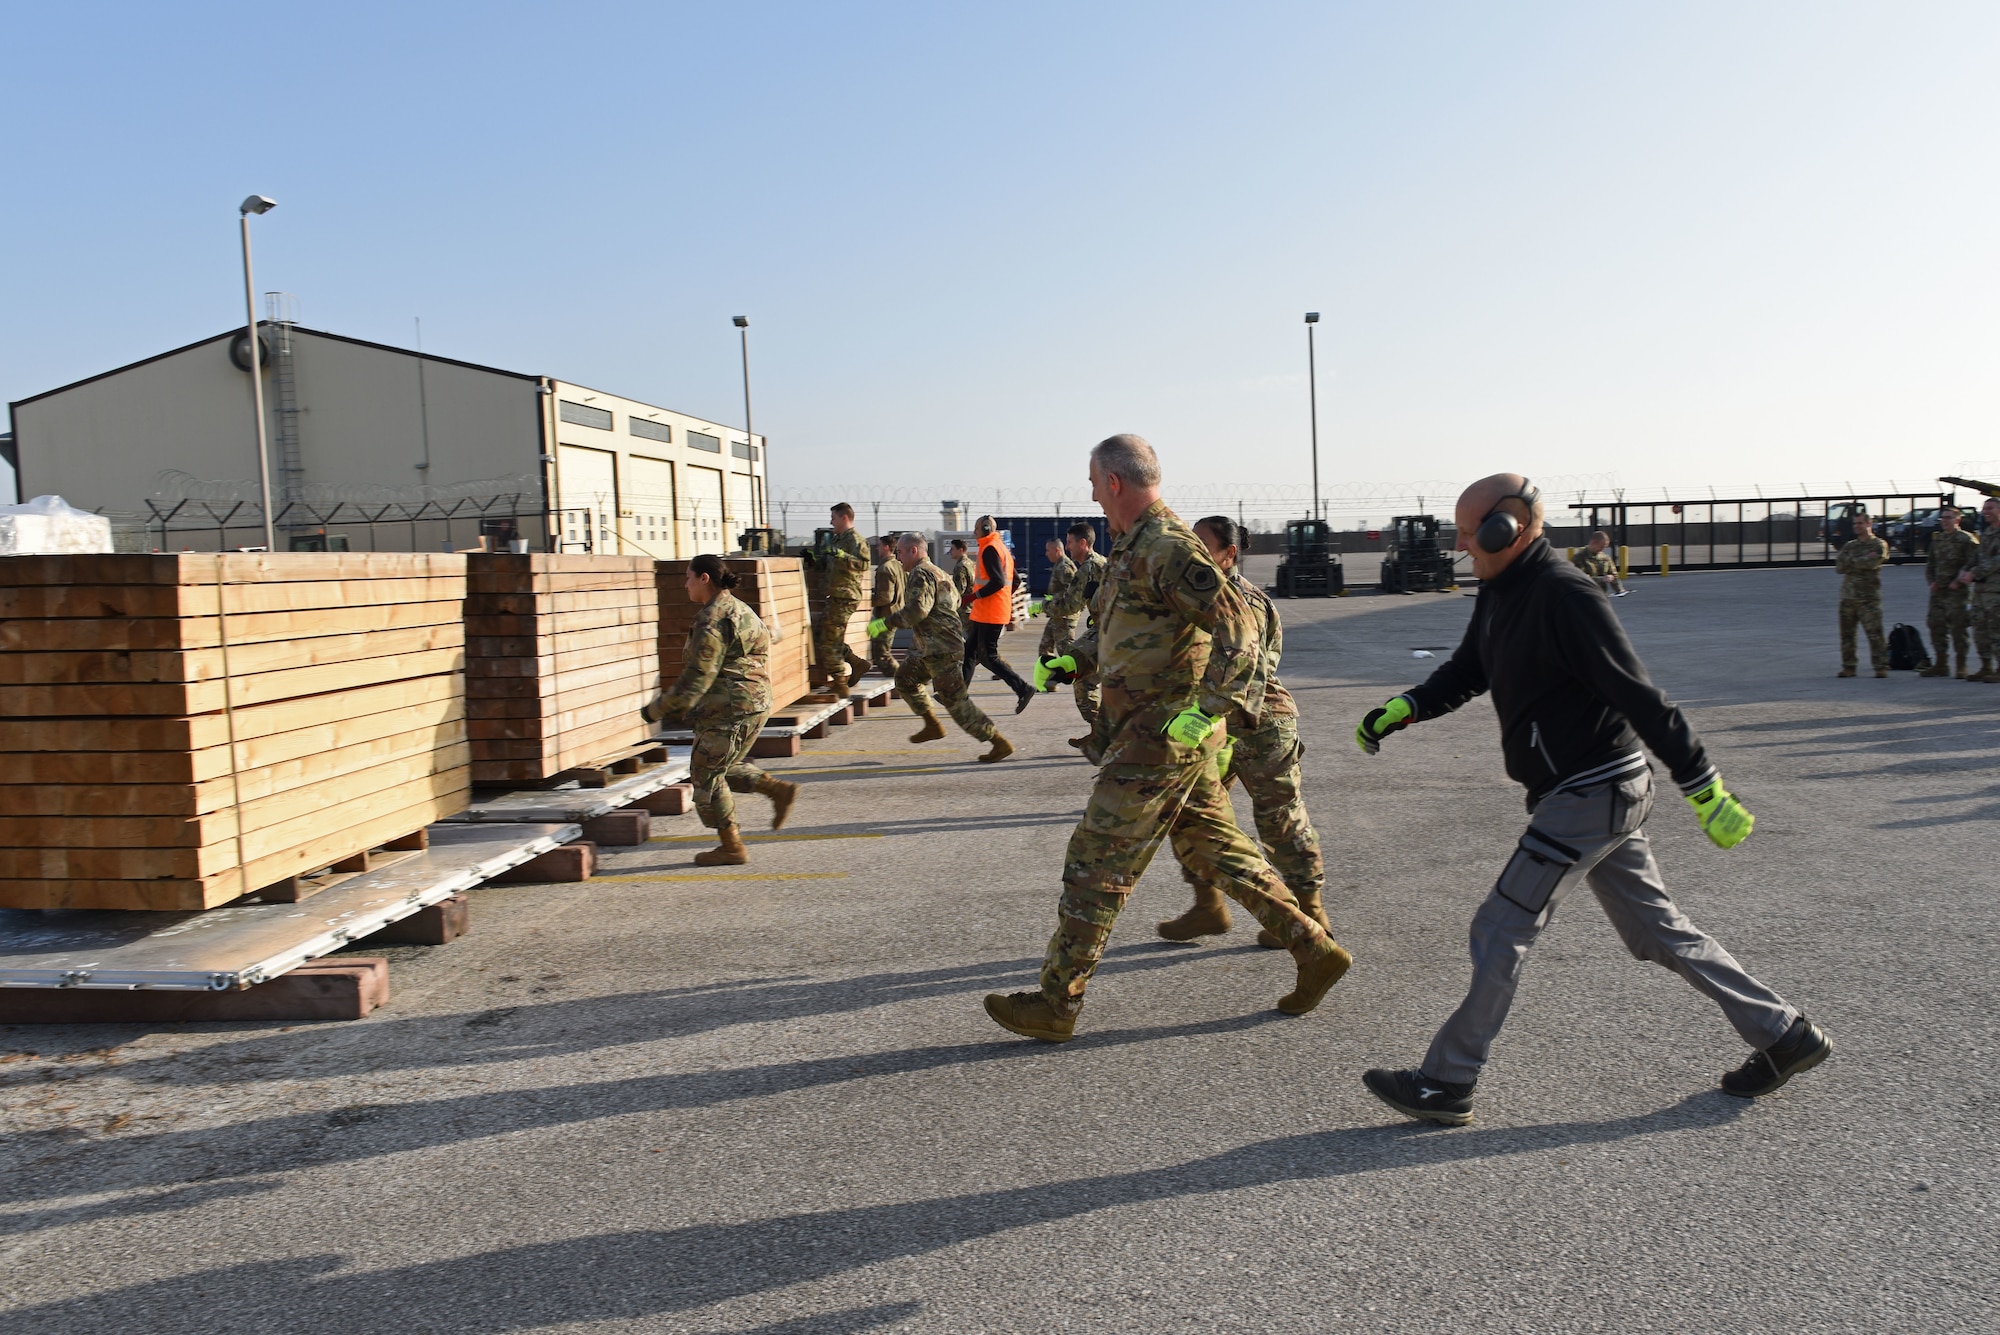 U.S. Air Force Expeditionary Center leadership participates in a pallet building competition with Airmen from the 724th Air Mobility Squadron and the 31st Logistics Readiness Squadron at Aviano Air Base, Italy, Jan. 24, 2020. The competition was part of a site visit conducted by the USAF Expeditionary Center as part of a larger visit to the geographically separated units under the 521st Air Mobility Operations Wing’s area of responsibility.